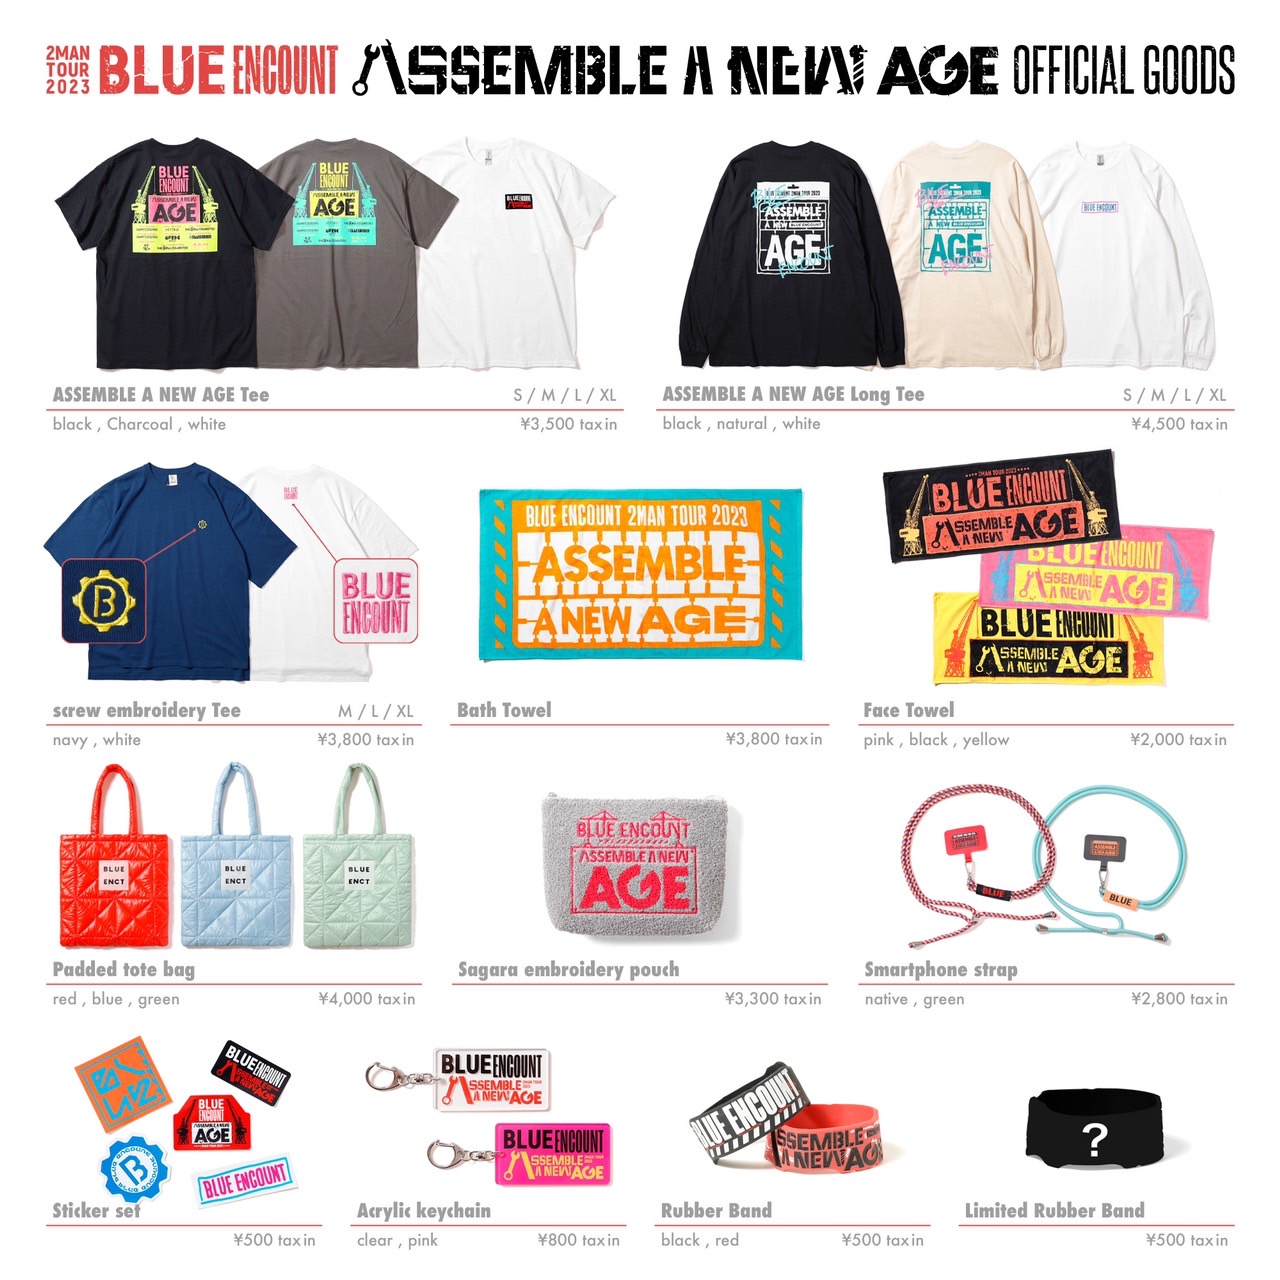 ASSEMBLE A NEW AGE ツアーグッズ解禁！